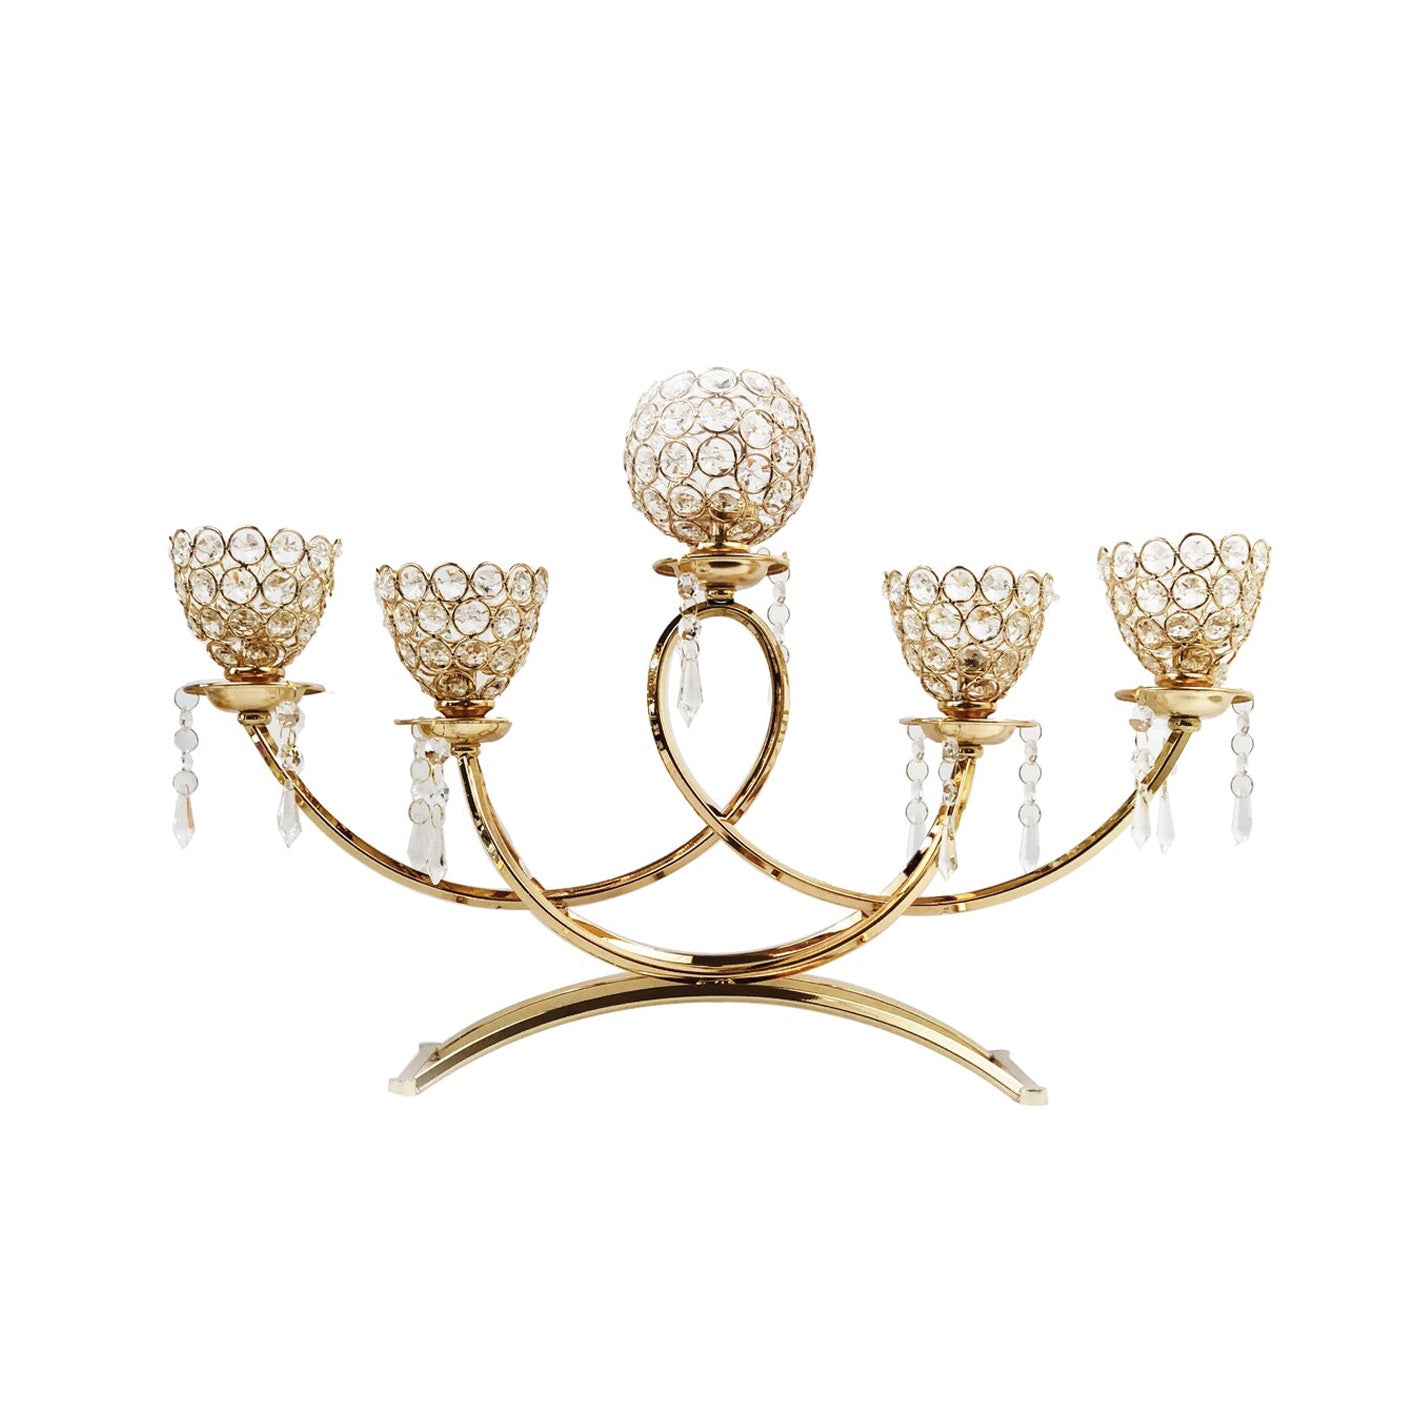 Crystal Candle Holders - 32416-28